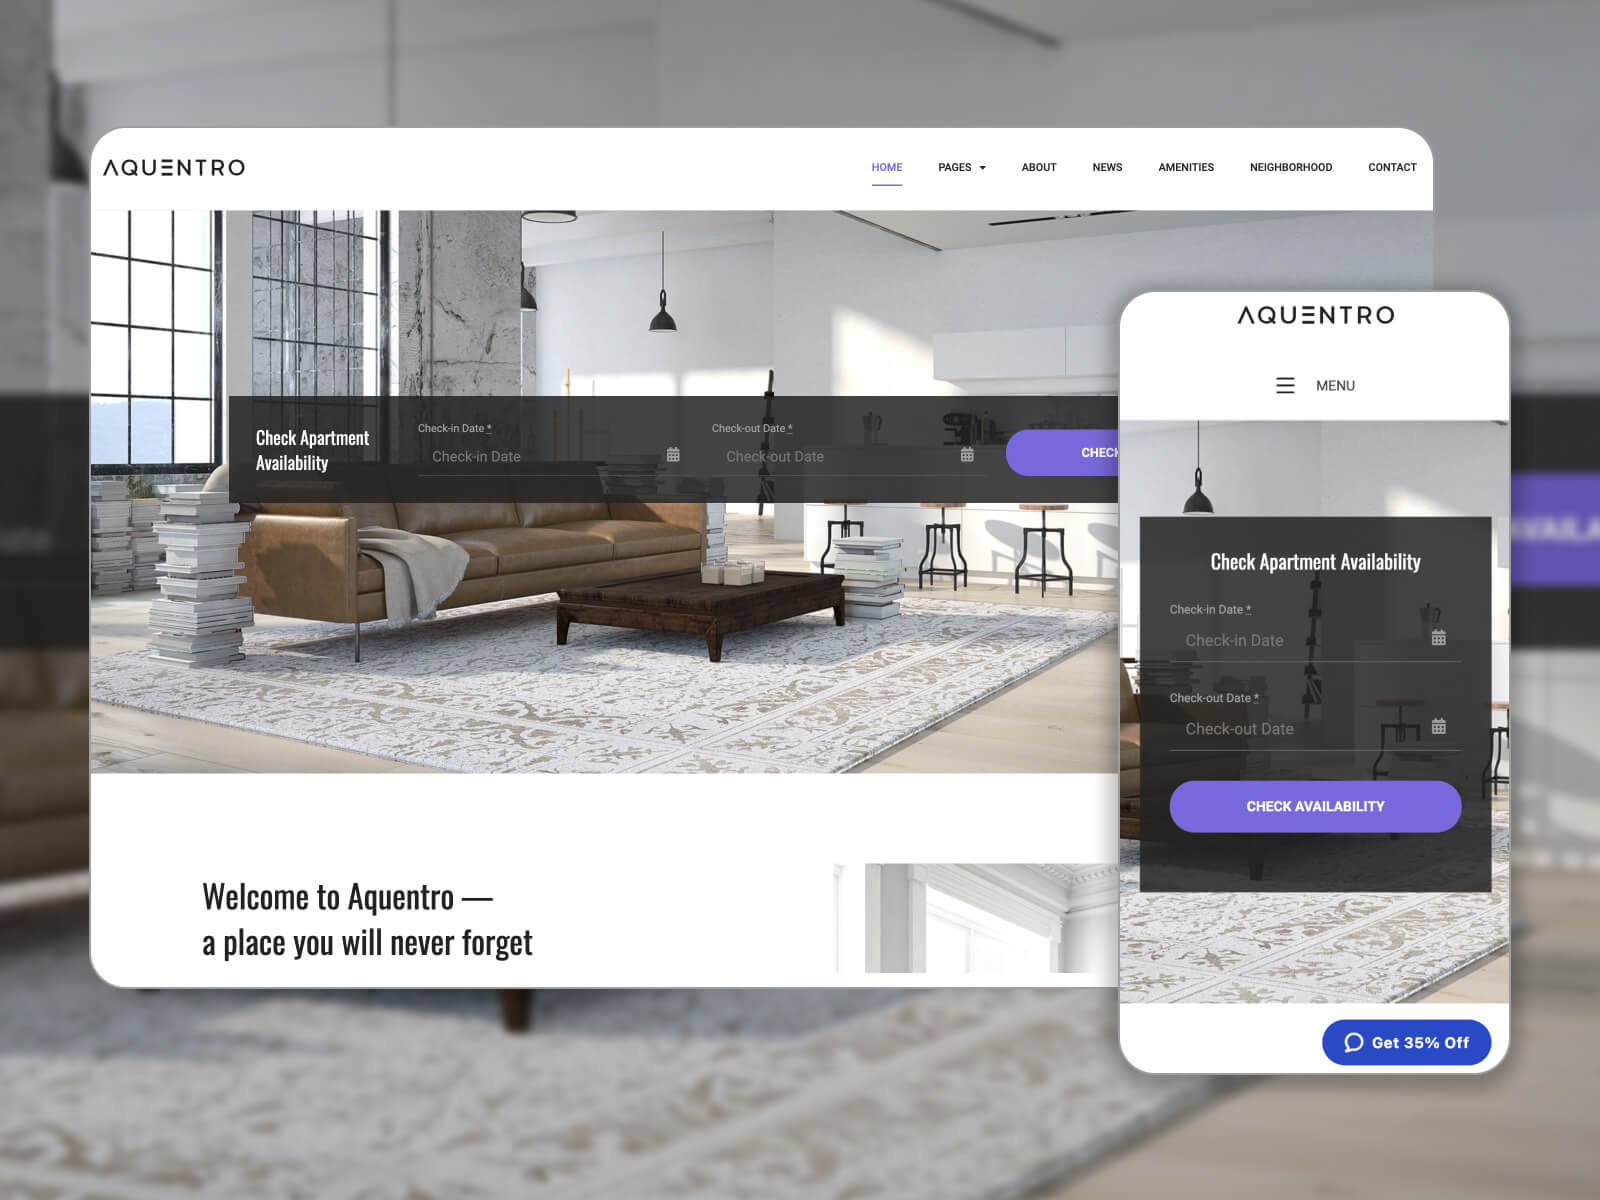  Image of Aquentro - secure bed and breakfast Elementor template in gray, darkslategray, white, darkgray, and lightgray color scheme